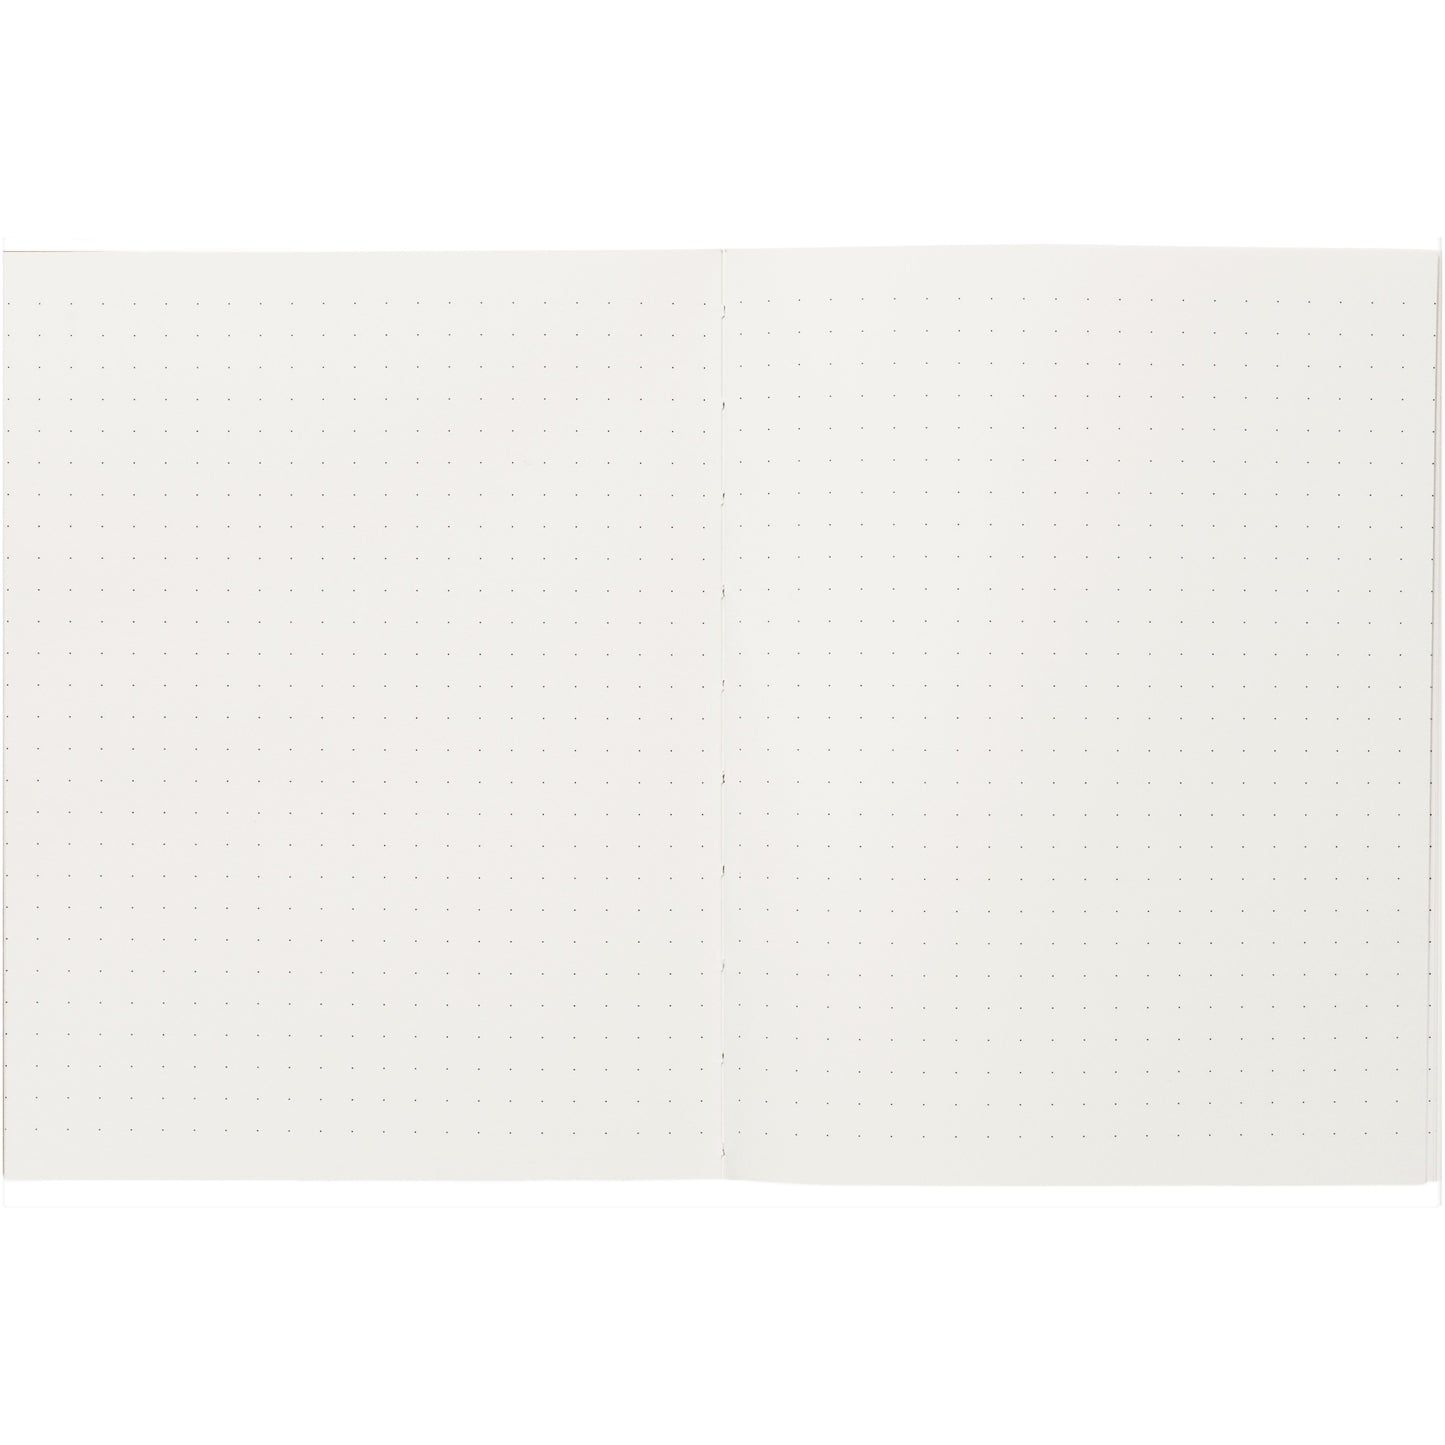 Layflat notebook with dark ochre softcover with black grid lines, inner dotted pages pictured